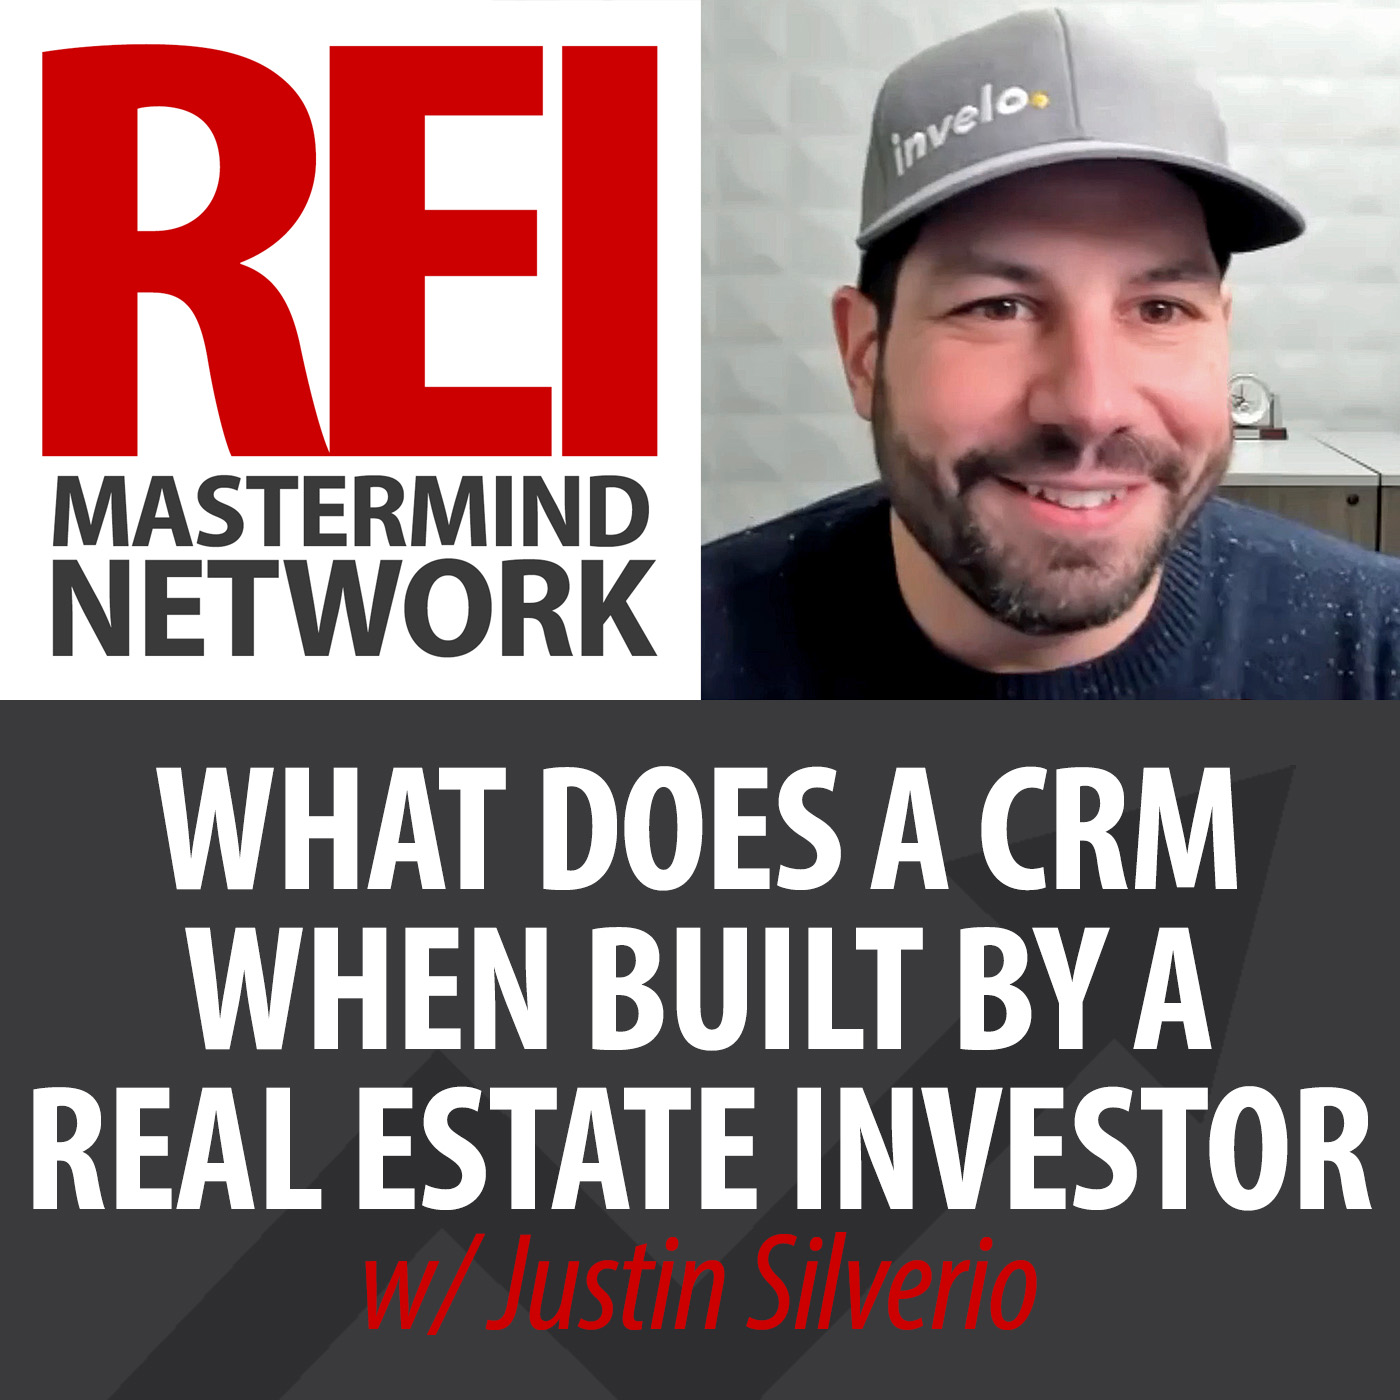 What Does a CRM Look Like When Built by a Real Estate Investor with Justin Silverio